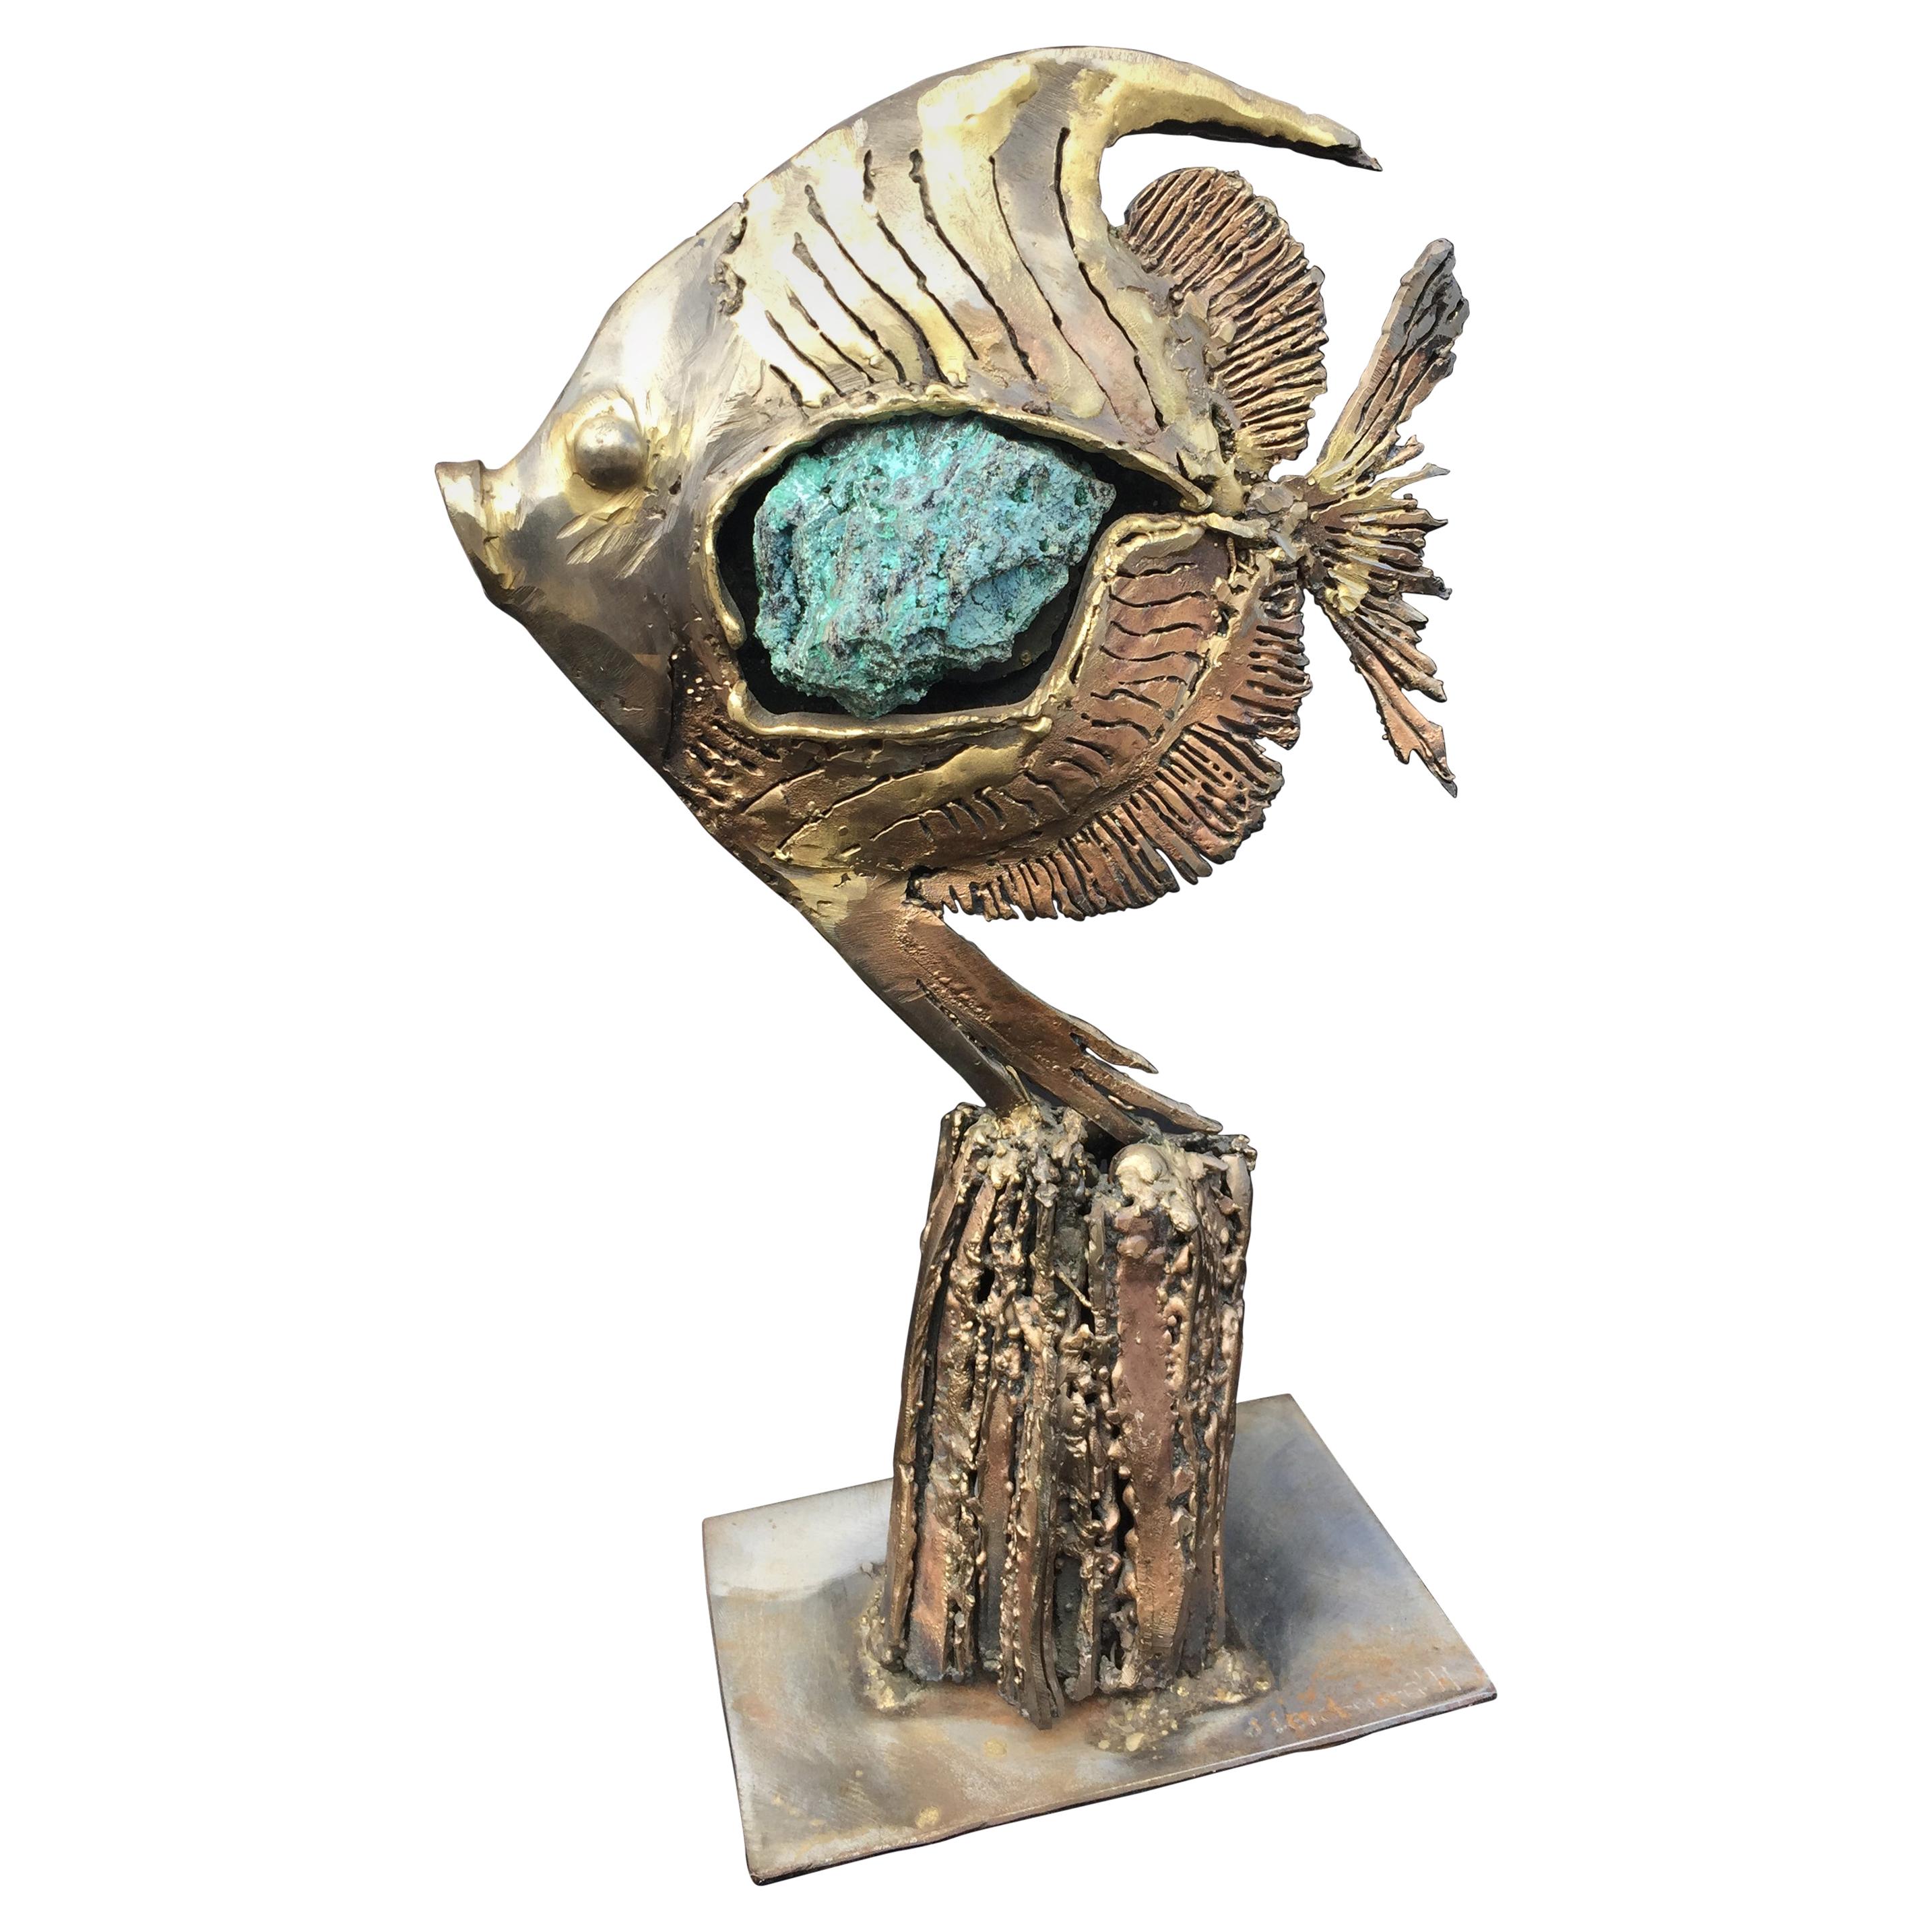 Gilt Brass Sculpture and Turquoise Stone Included in the Body of the Fish